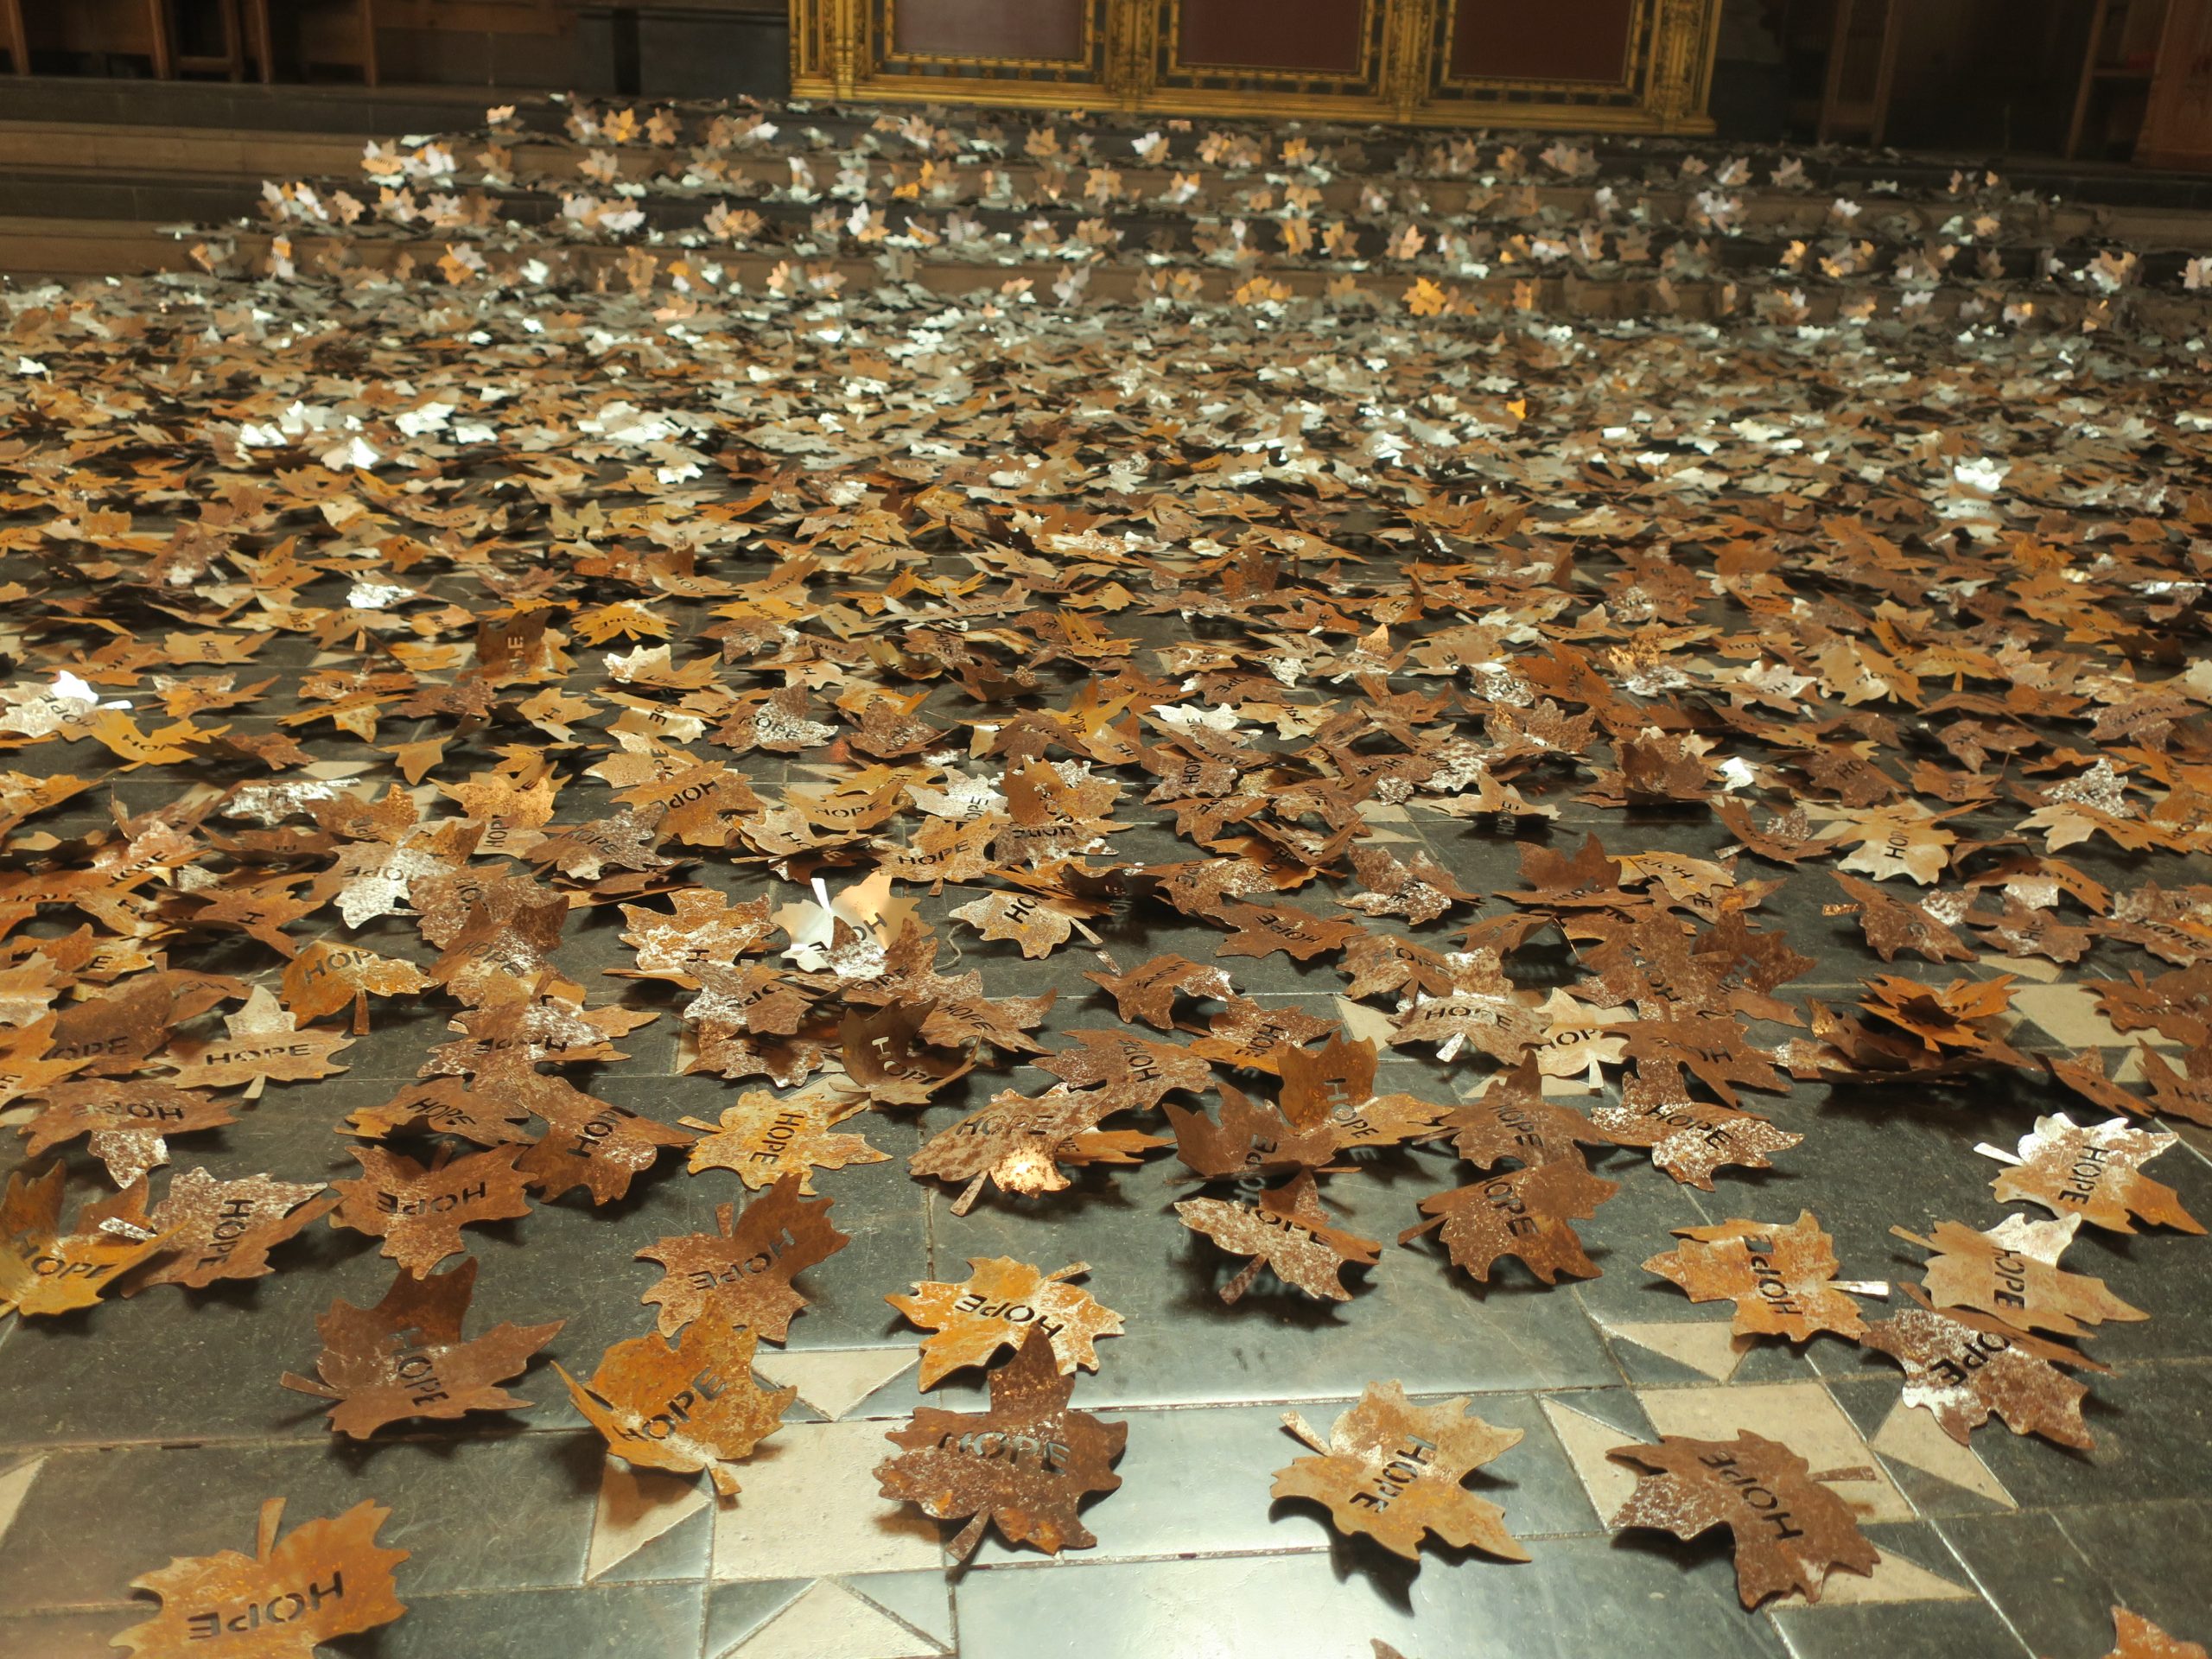 The 'Leaves of the Trees'